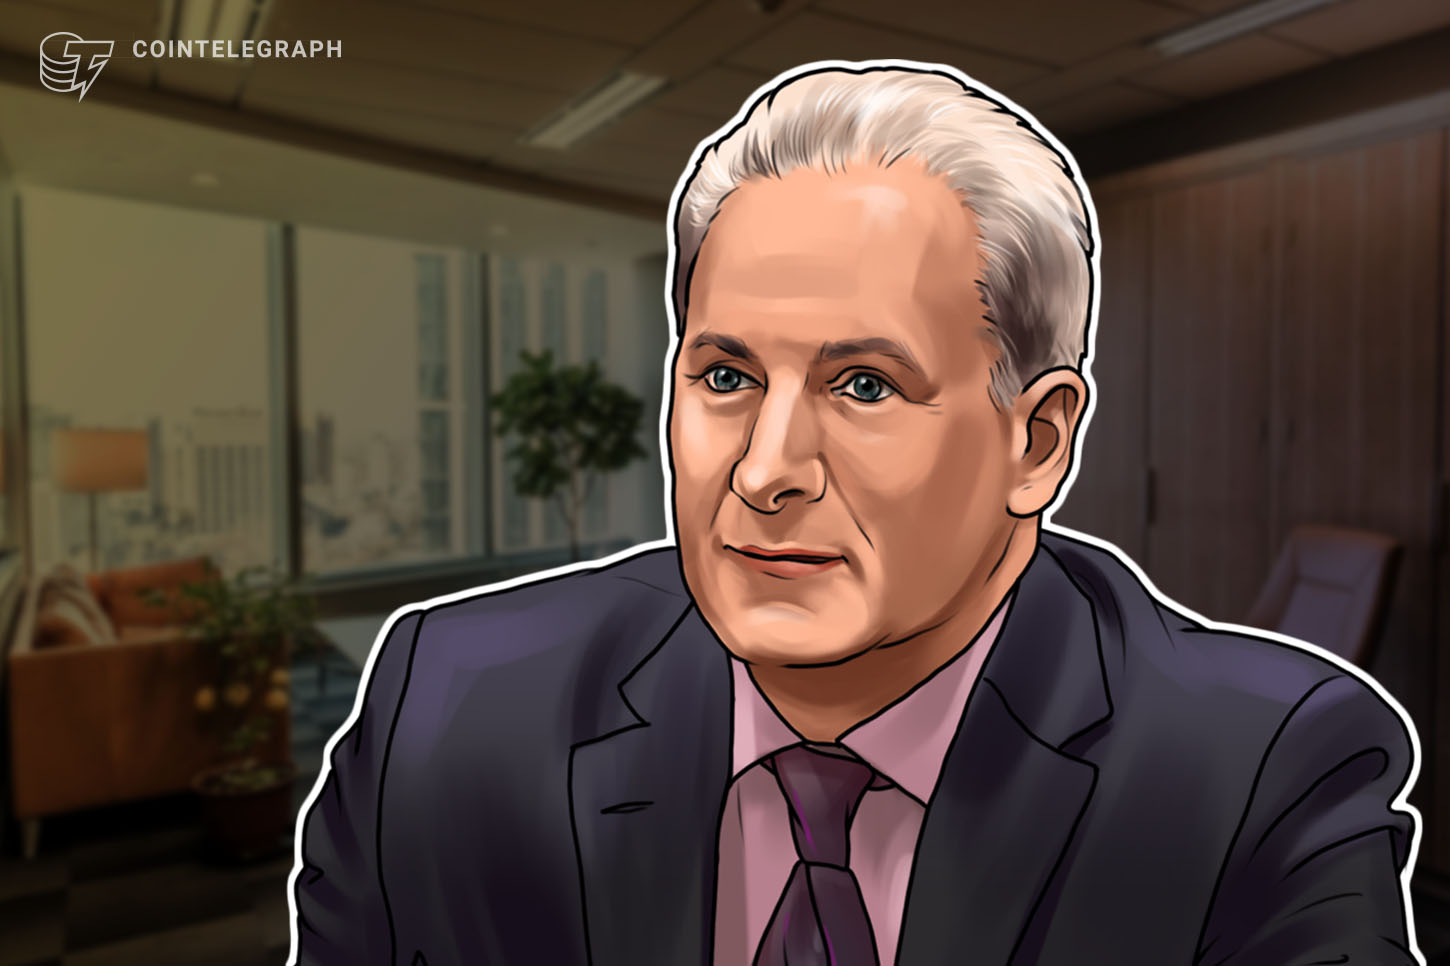 Rich Bitcoin critic Peter Schiff is soliciting BTC birthday items for his son